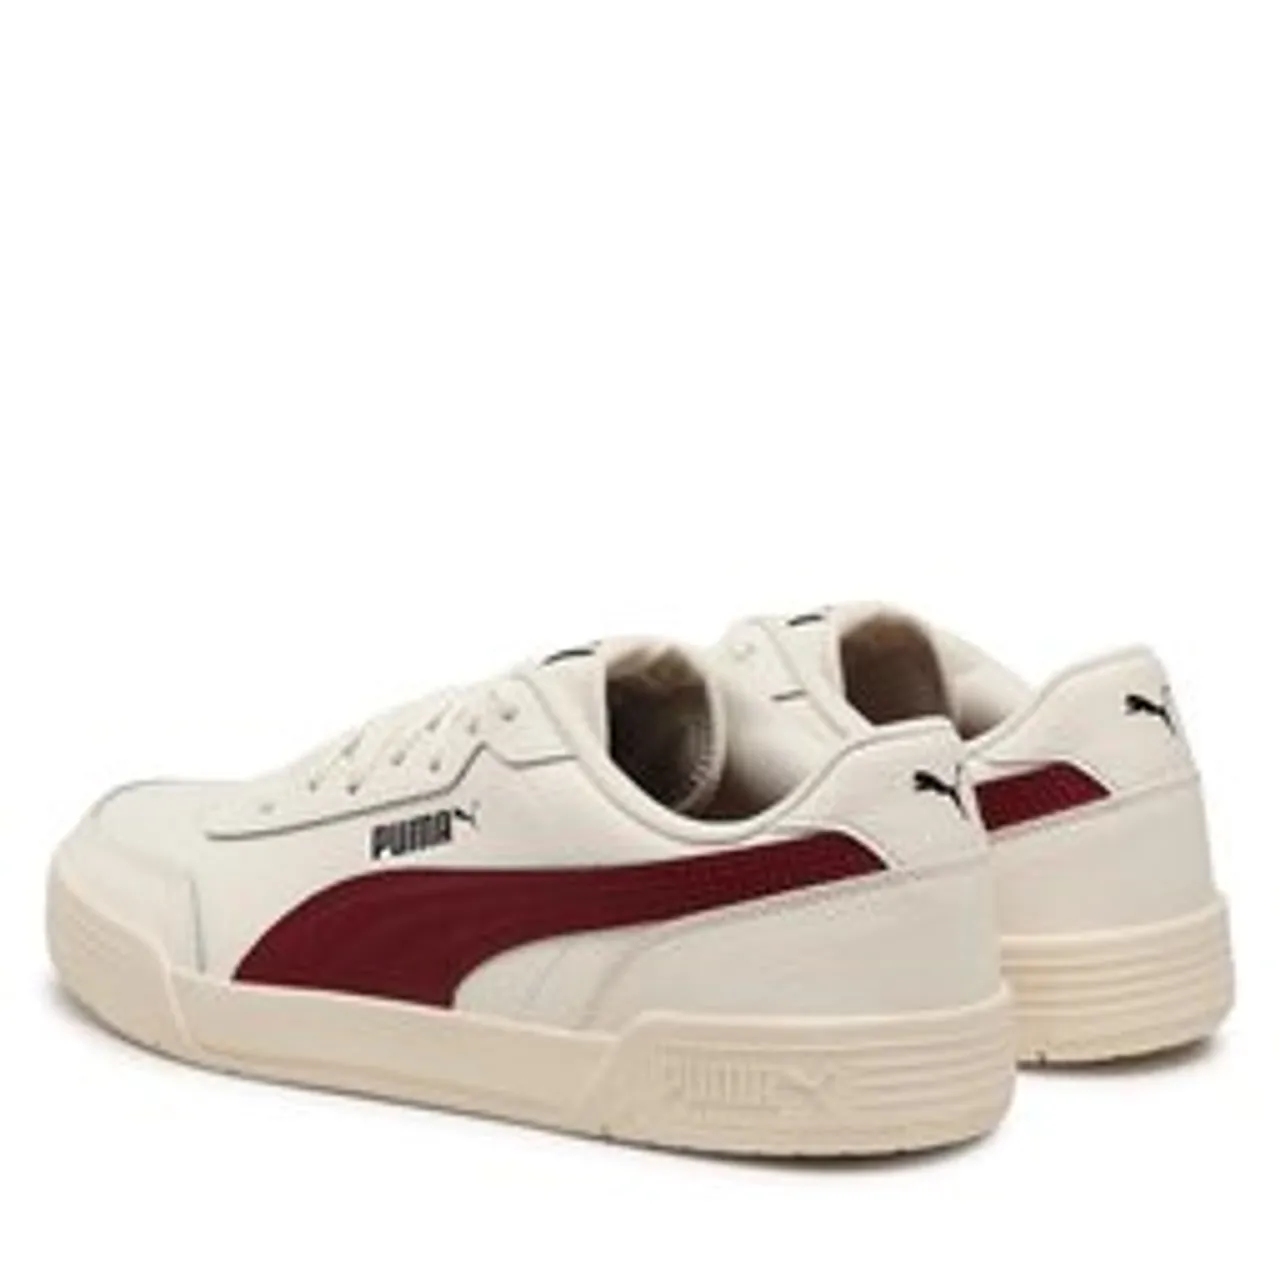 Sneakers Puma Caracal 369863 41 Frostedivory/Regal Red/Black